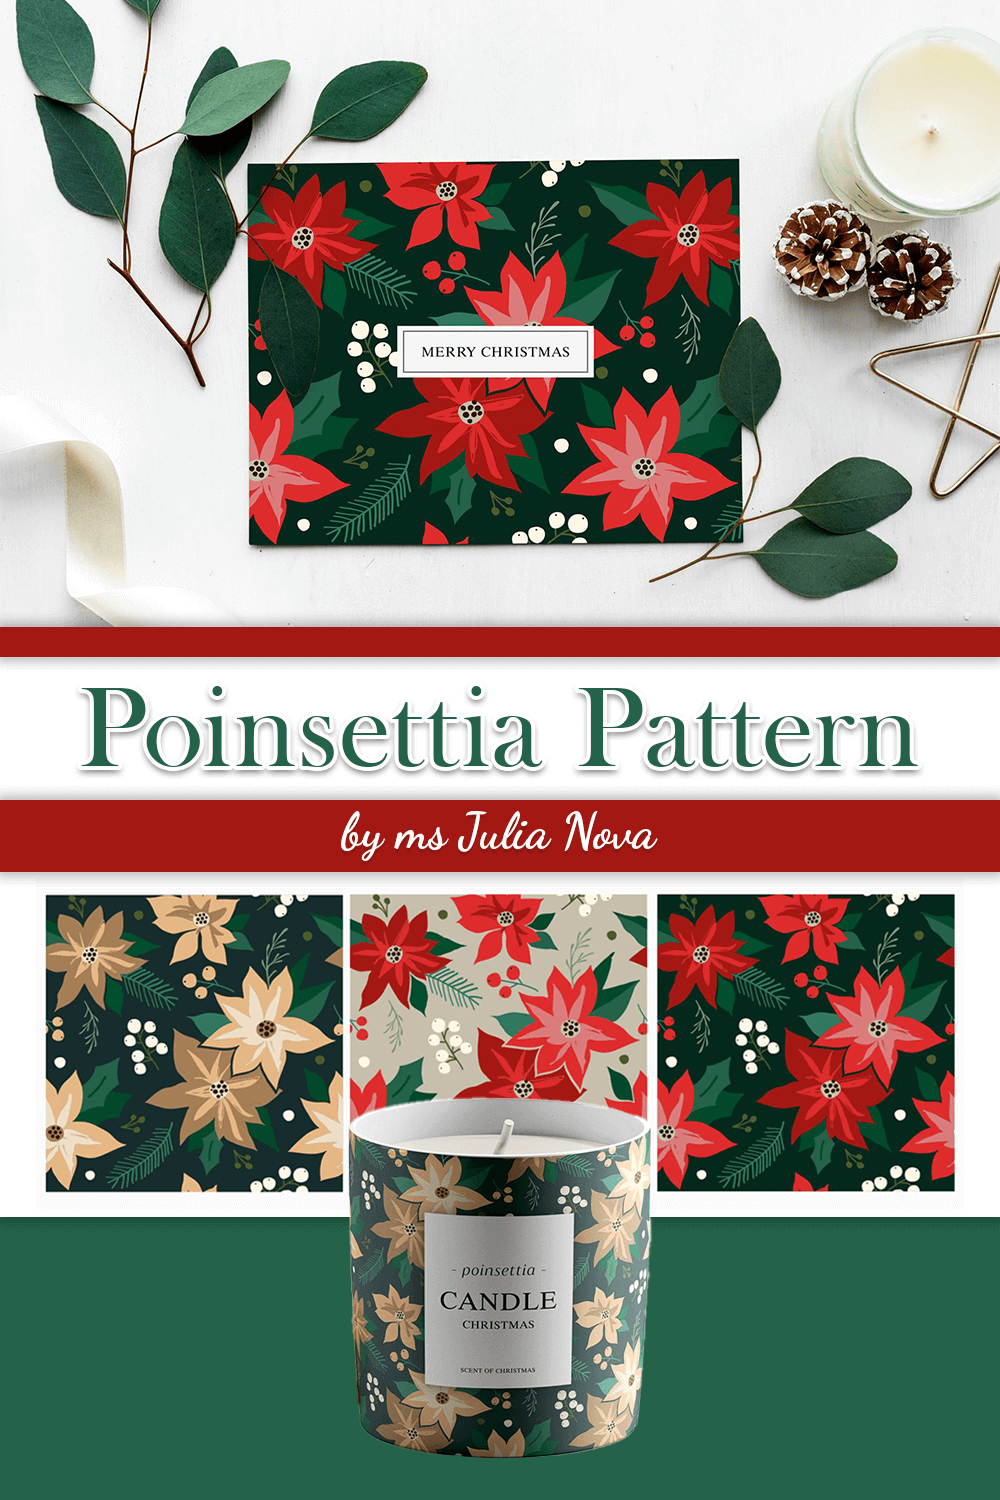 Poinsettia Pattern with gold and red flowers.